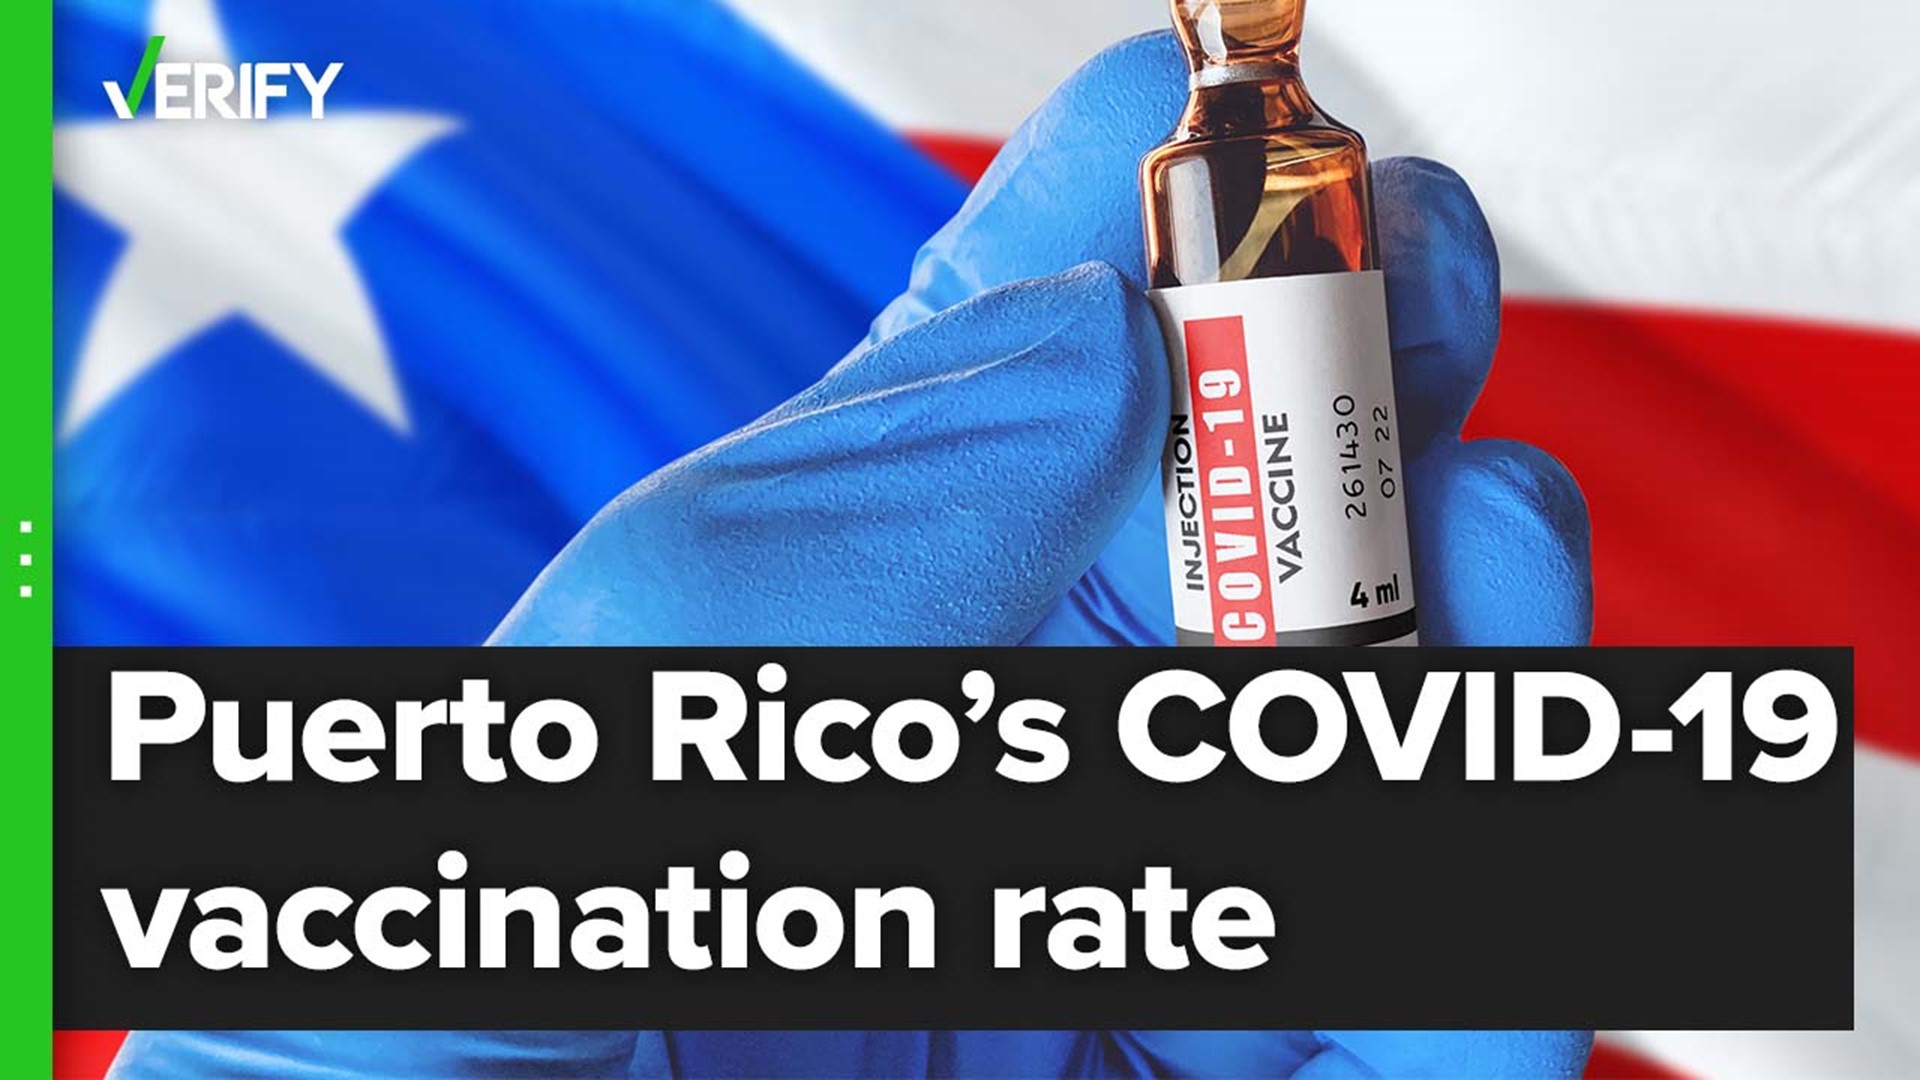 Four in five people eligible to receive the vaccine in Puerto Rico are fully vaccinated, which is a higher rate than any other U.S. state or territory.